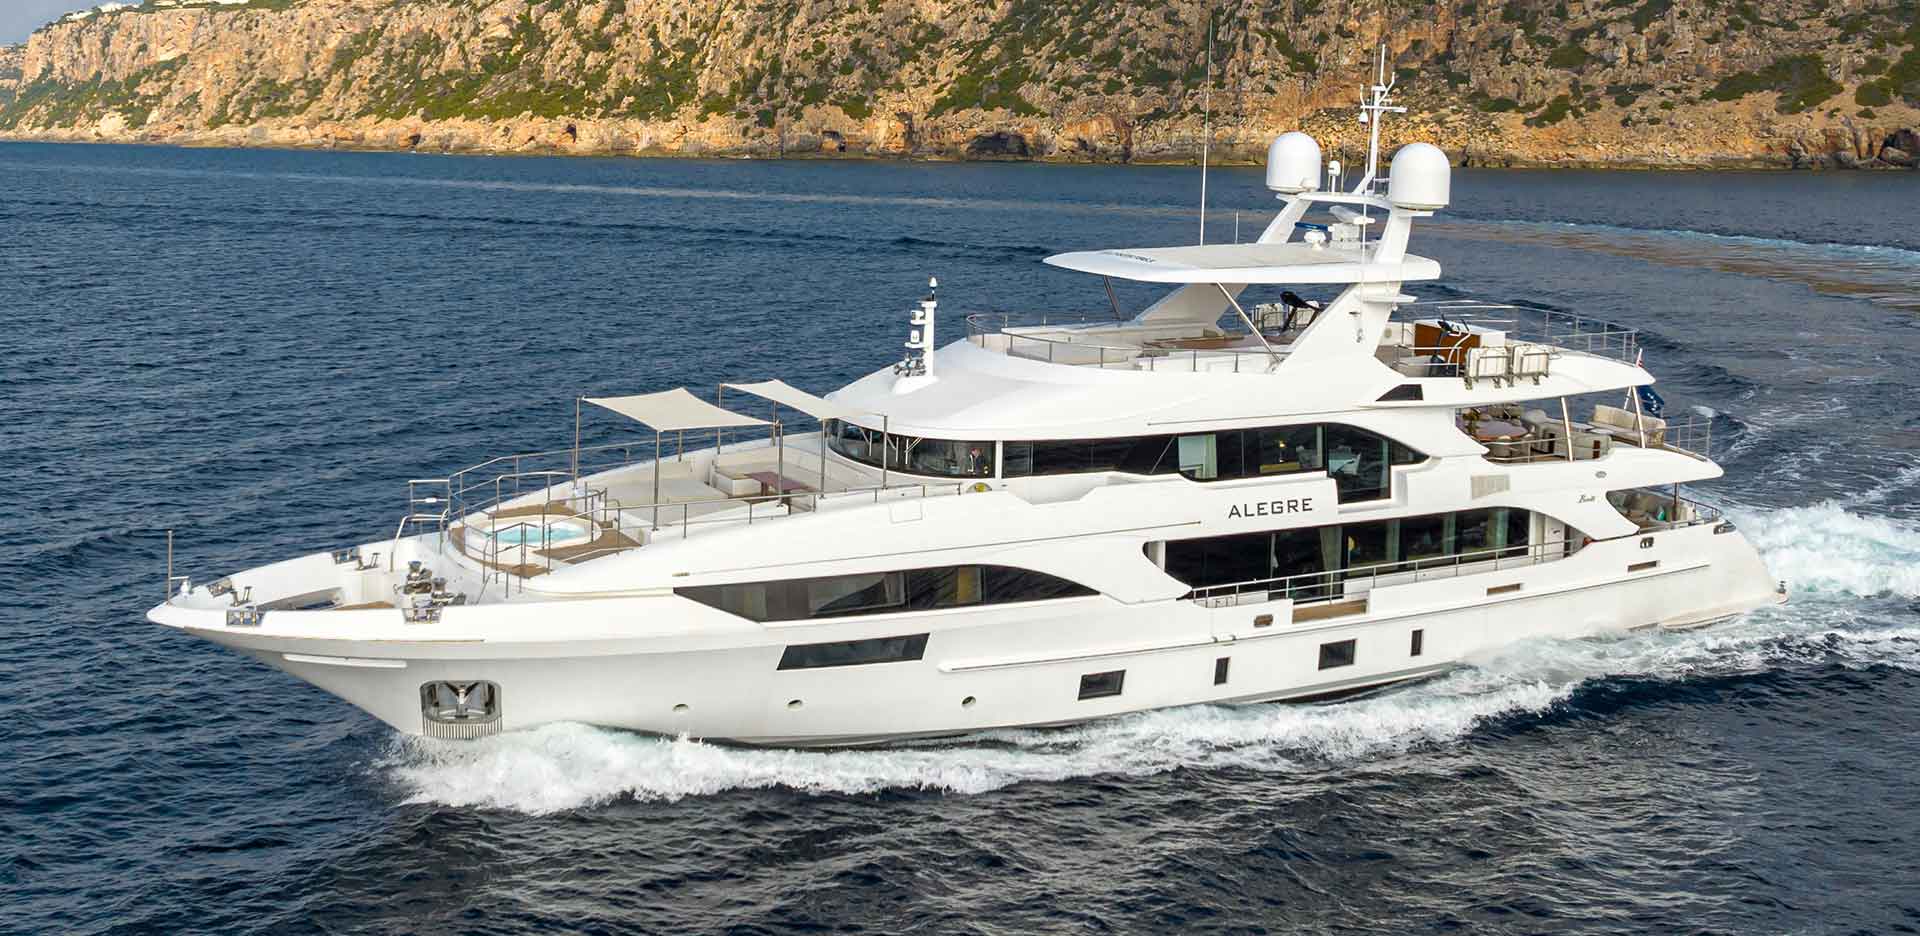 Luxury Yacht Group accounces motor yacht Alegre (40 meter) now available for charter